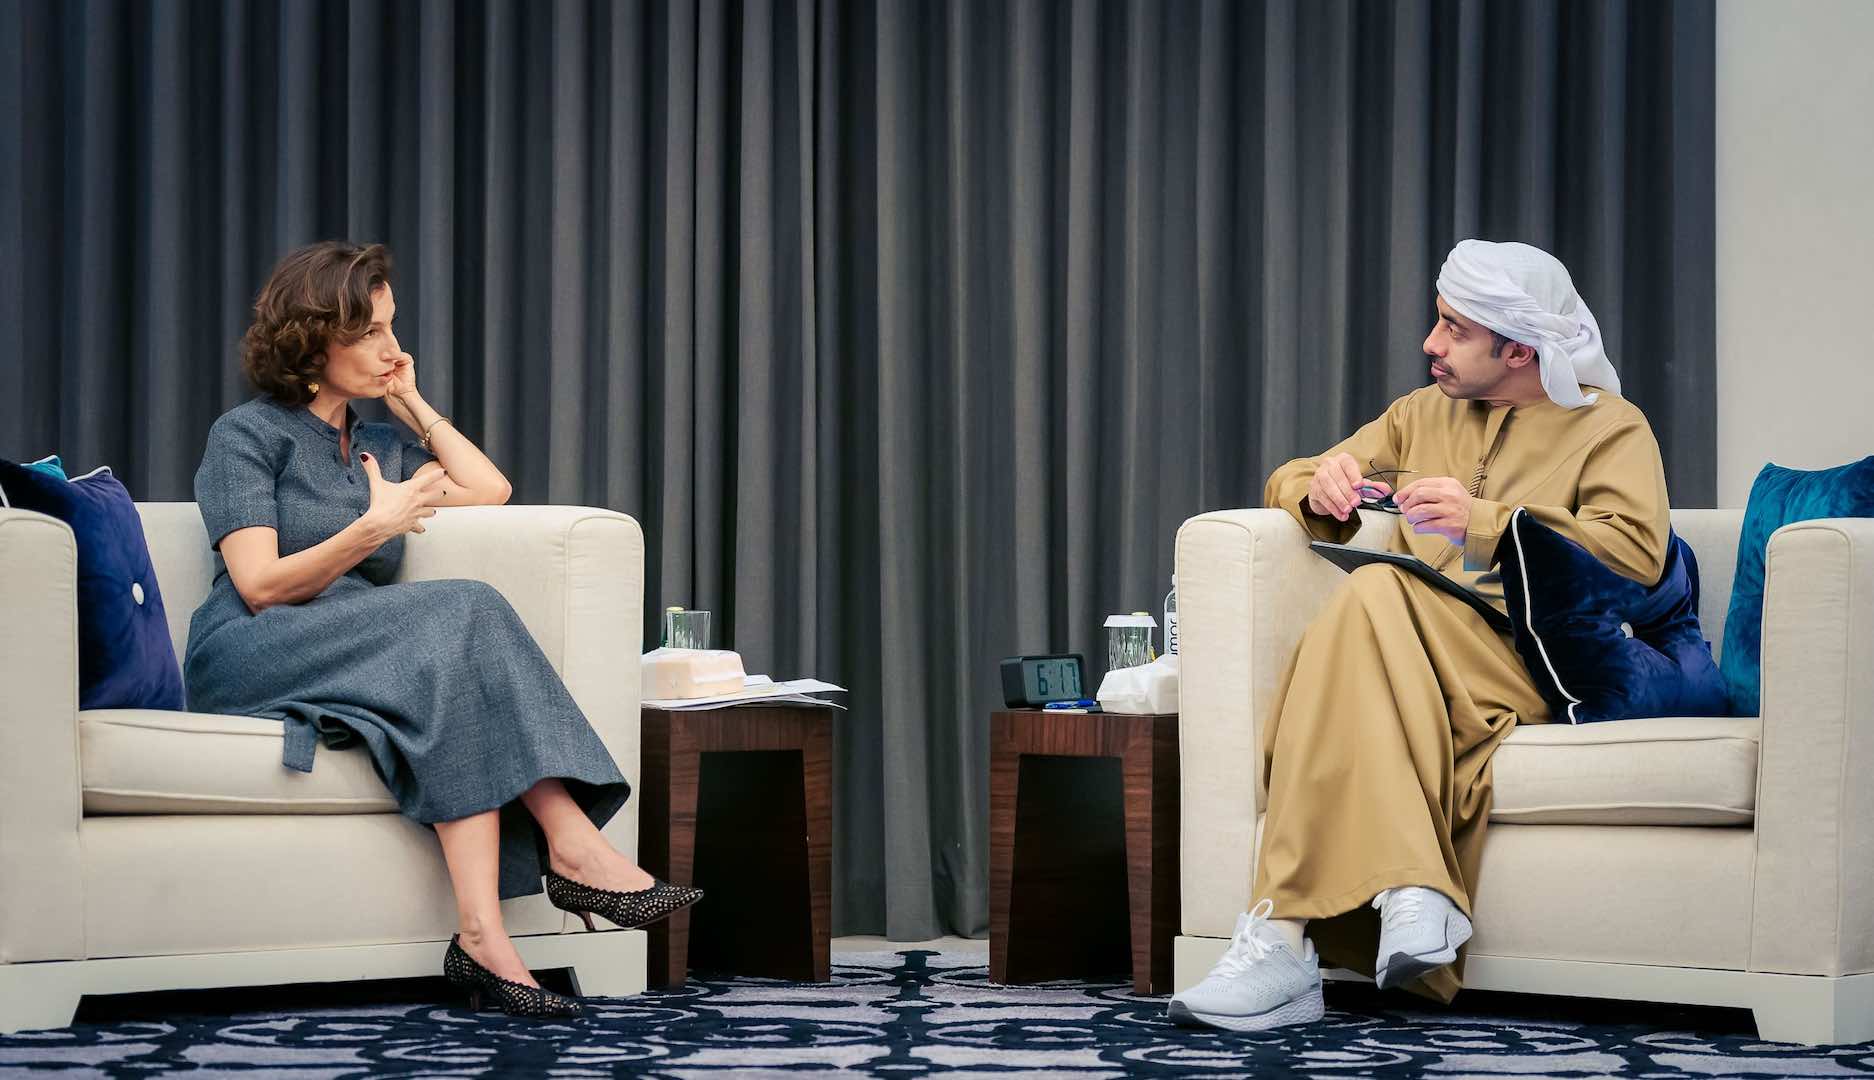 UAE foreign minister meets UNESCO director general